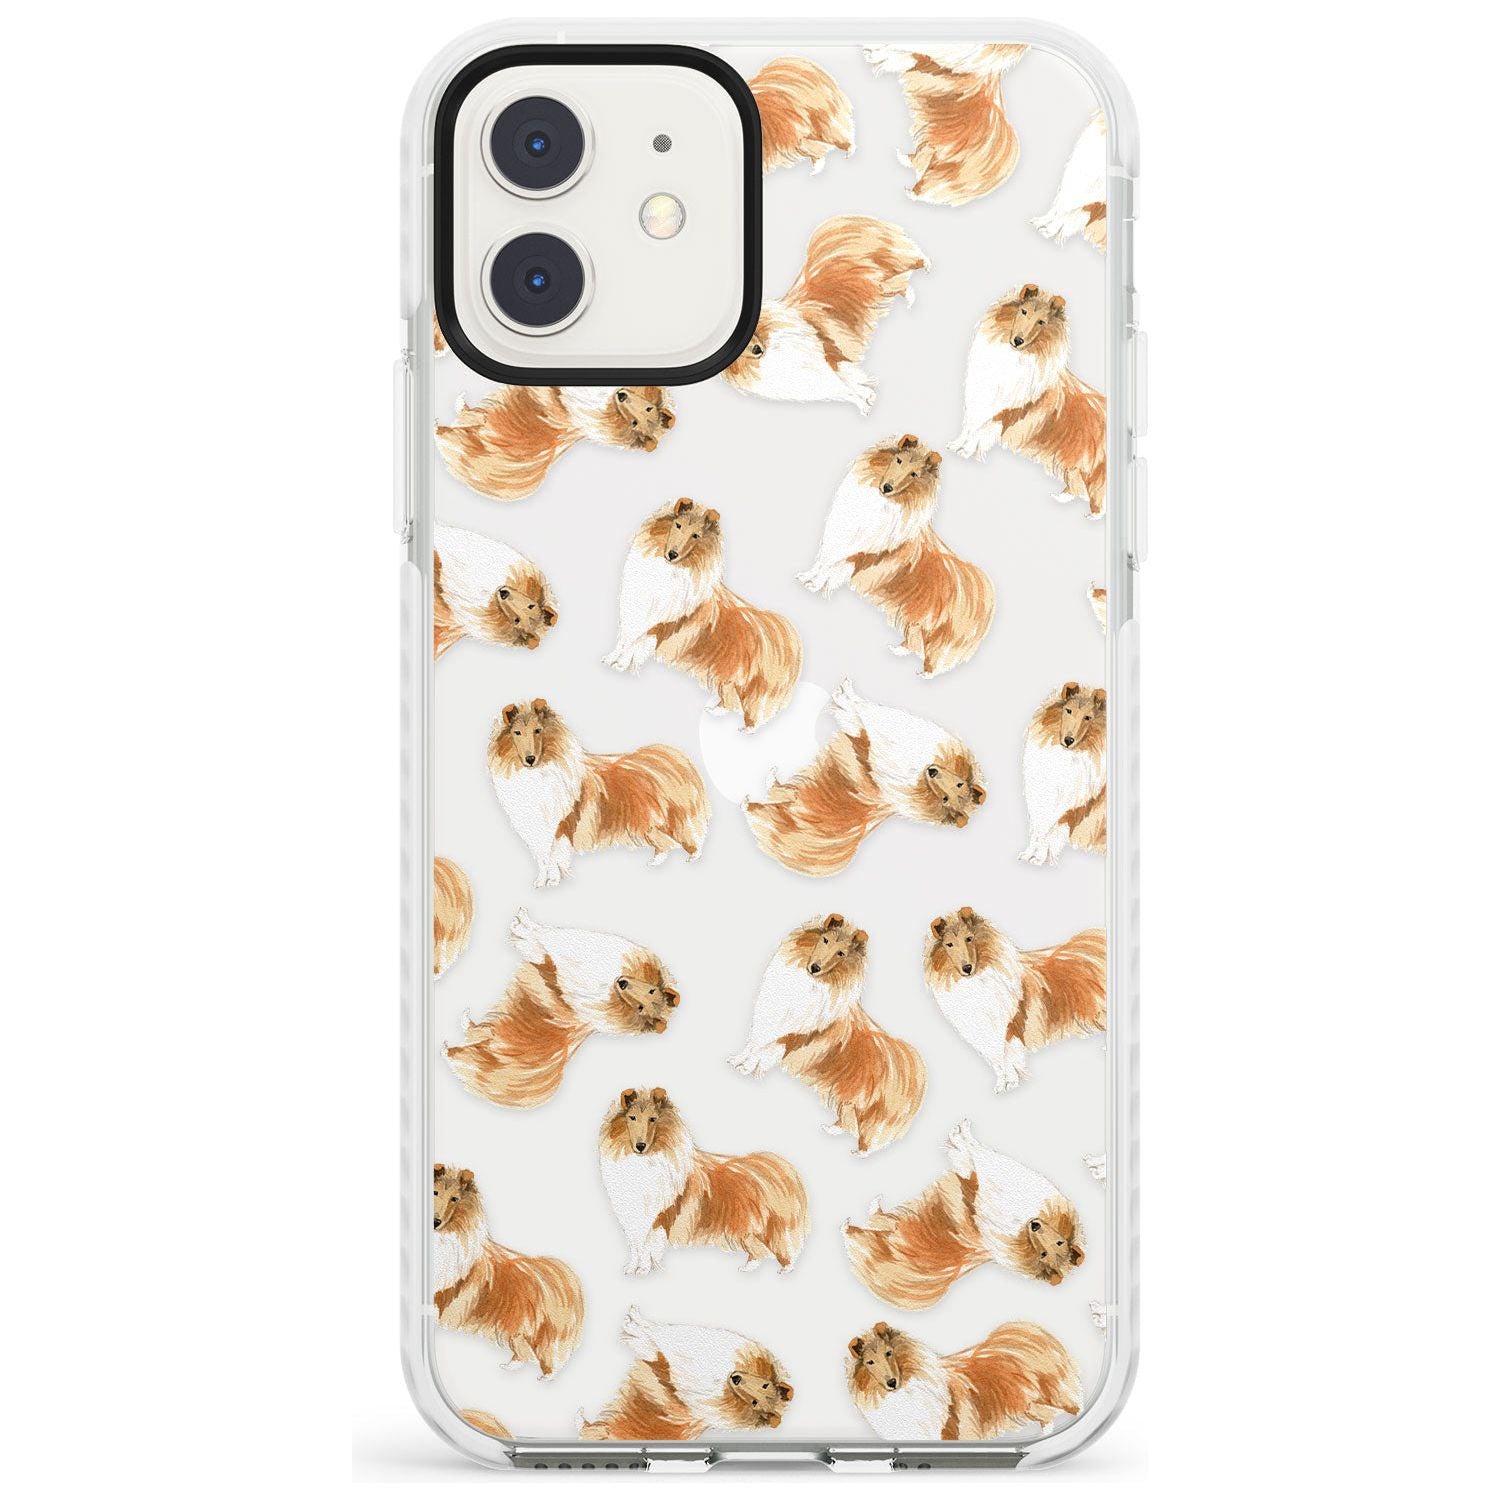 Rough Collie Watercolour Dog Pattern Impact Phone Case for iPhone 11